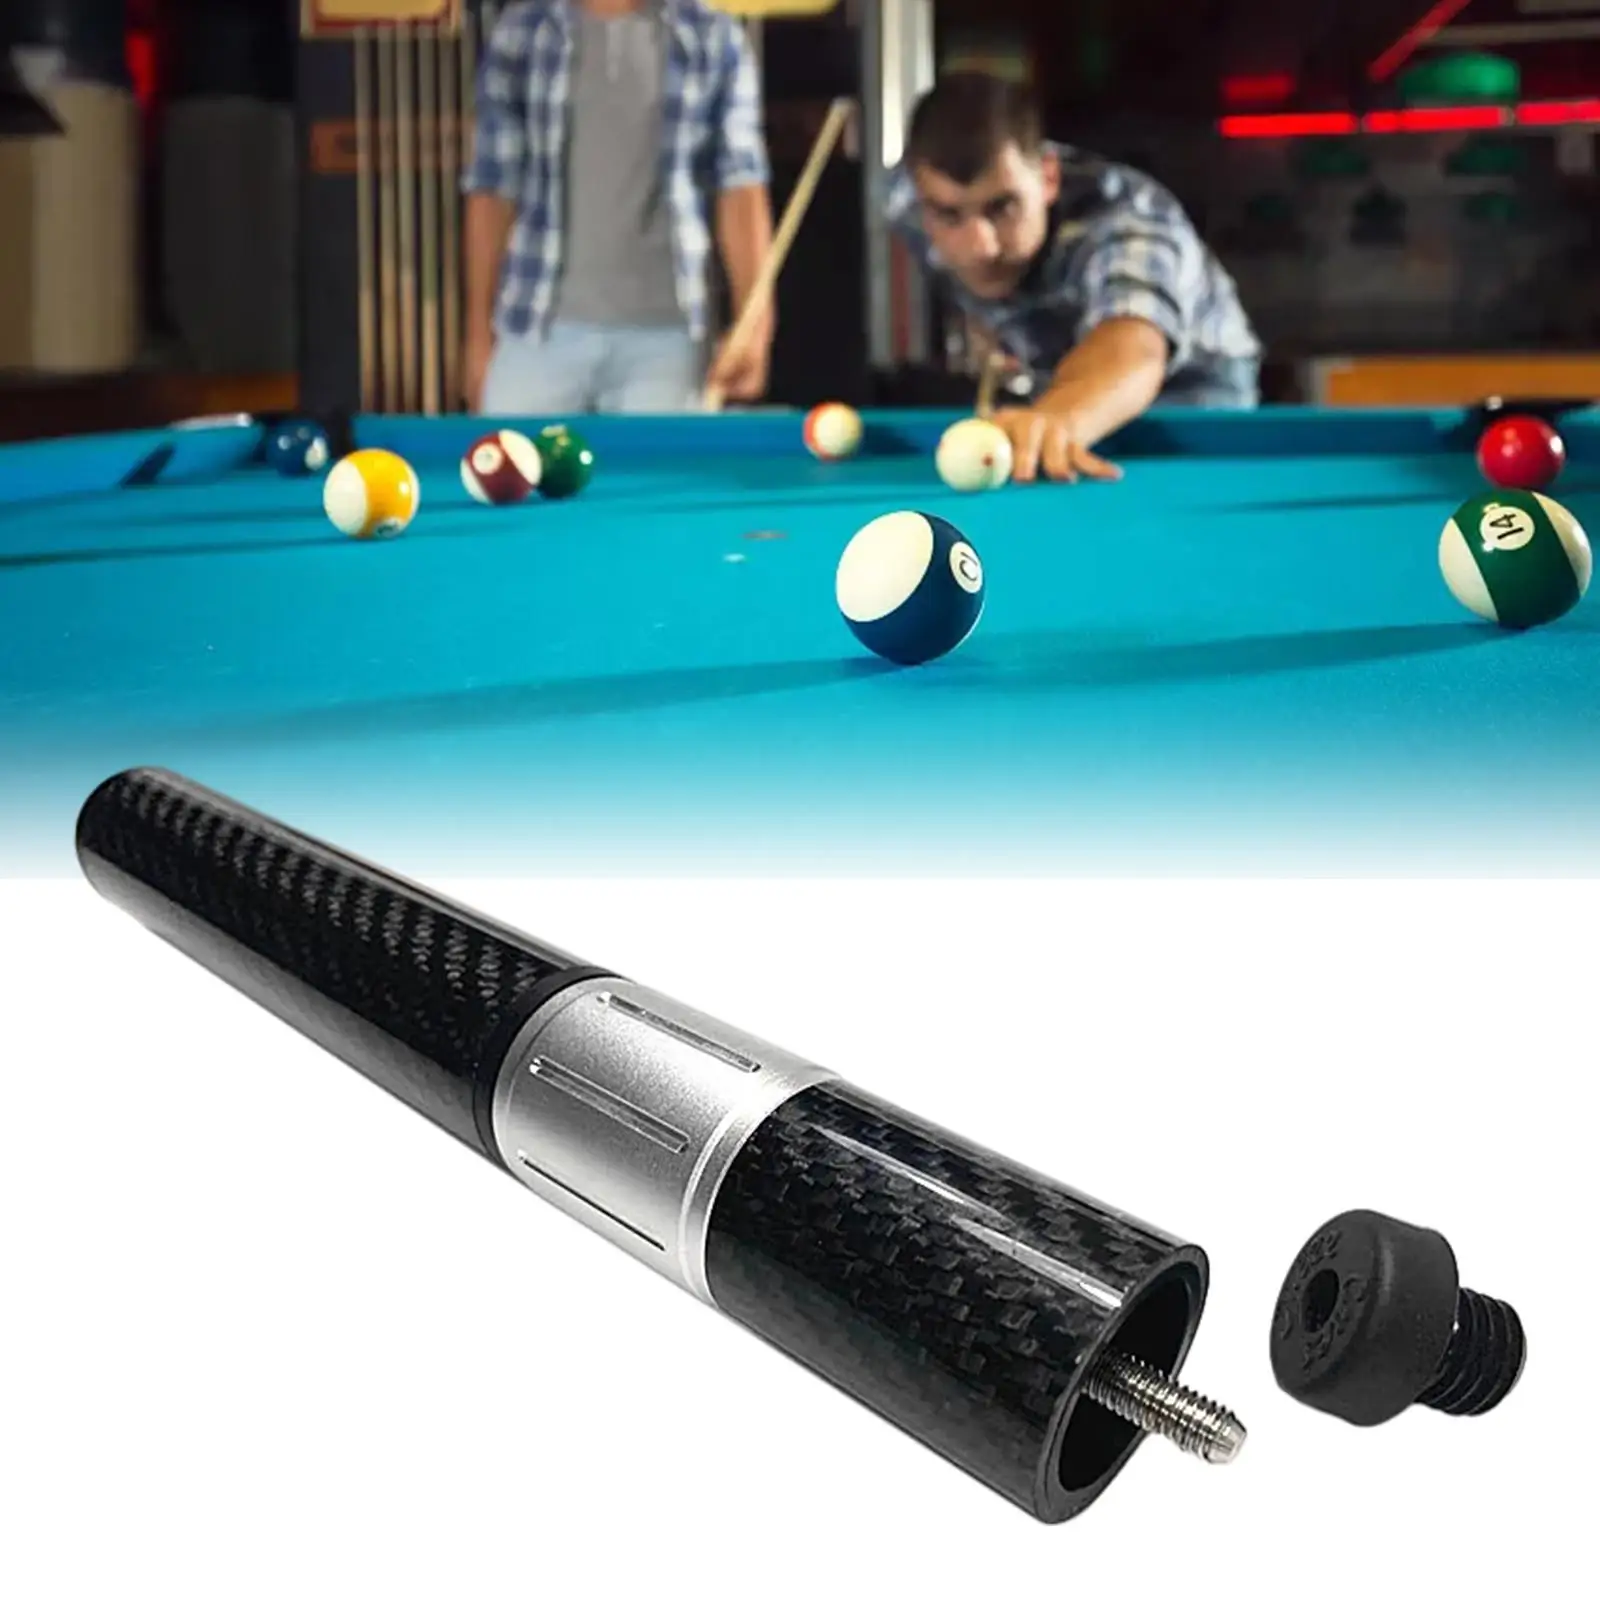 High Quality Pool Cue Extension Carbon Fiber Telescopic Nine Ball Club Accessories, Parts, Lengthen Tools for Billiards Sticks